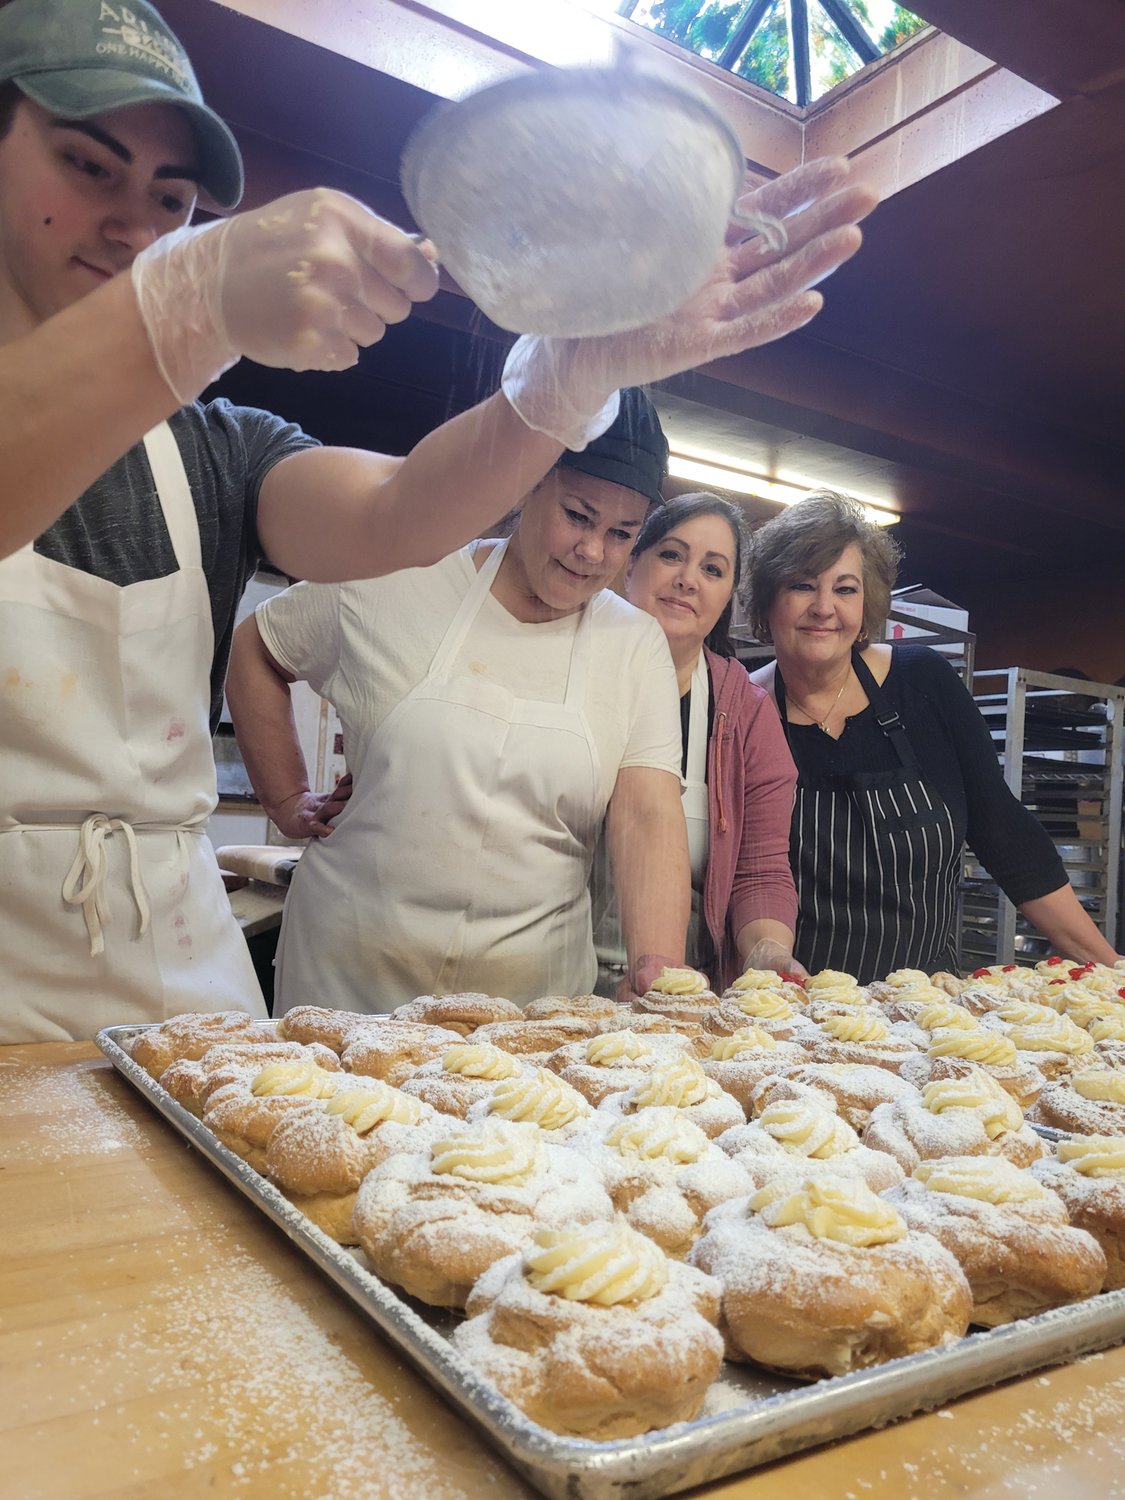 A DUSTING OF TRADITION: Brendan Notarianni shakes some sugar on a completed batch of zeppoles, as his aunt (and owner of Solitro’s Bakery) Elena Pennacchini, mother Diane Notarianni, and another aunt, Paula Arlia, watch on.